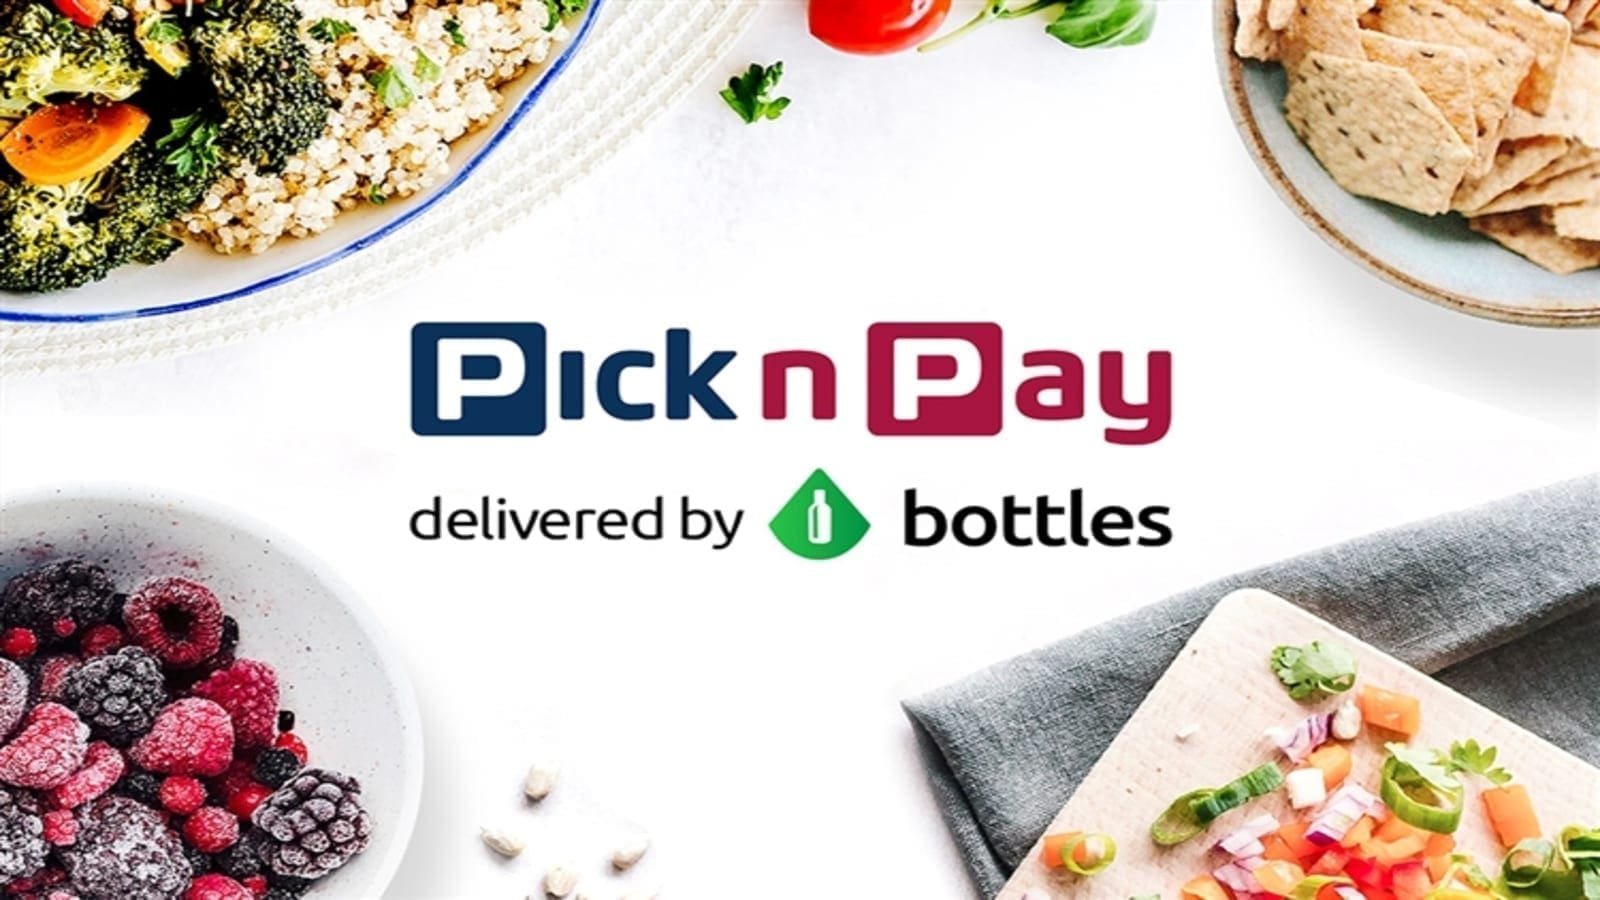 Pick n Pay strengthens grocery delivery acquiring Bottles as it eyes Nigerian market